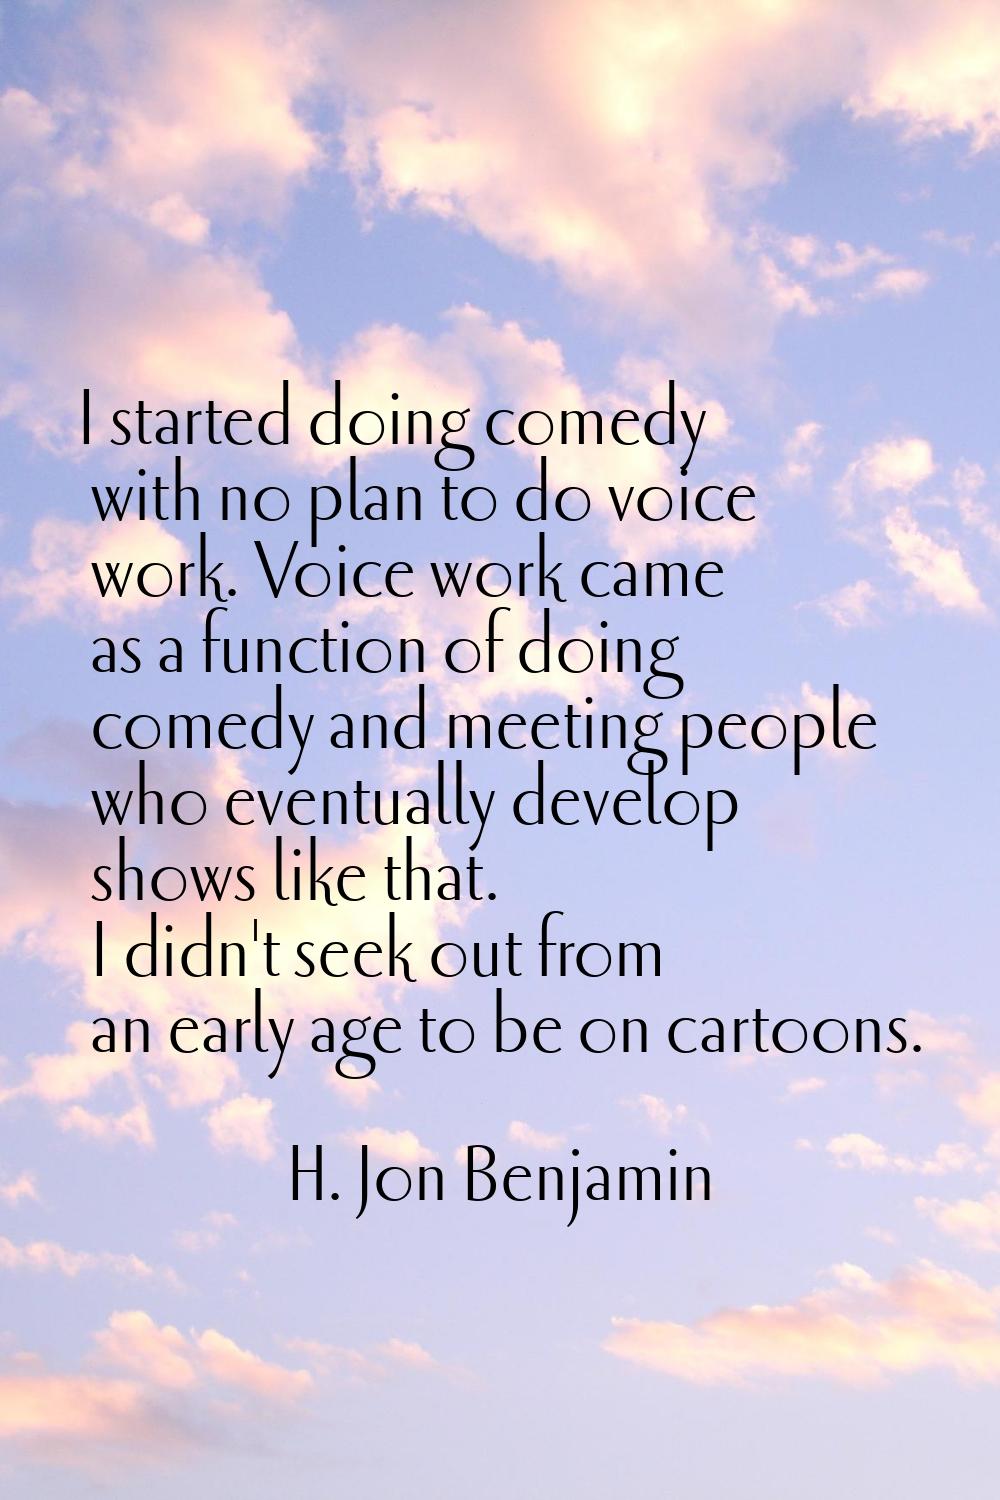 I started doing comedy with no plan to do voice work. Voice work came as a function of doing comedy